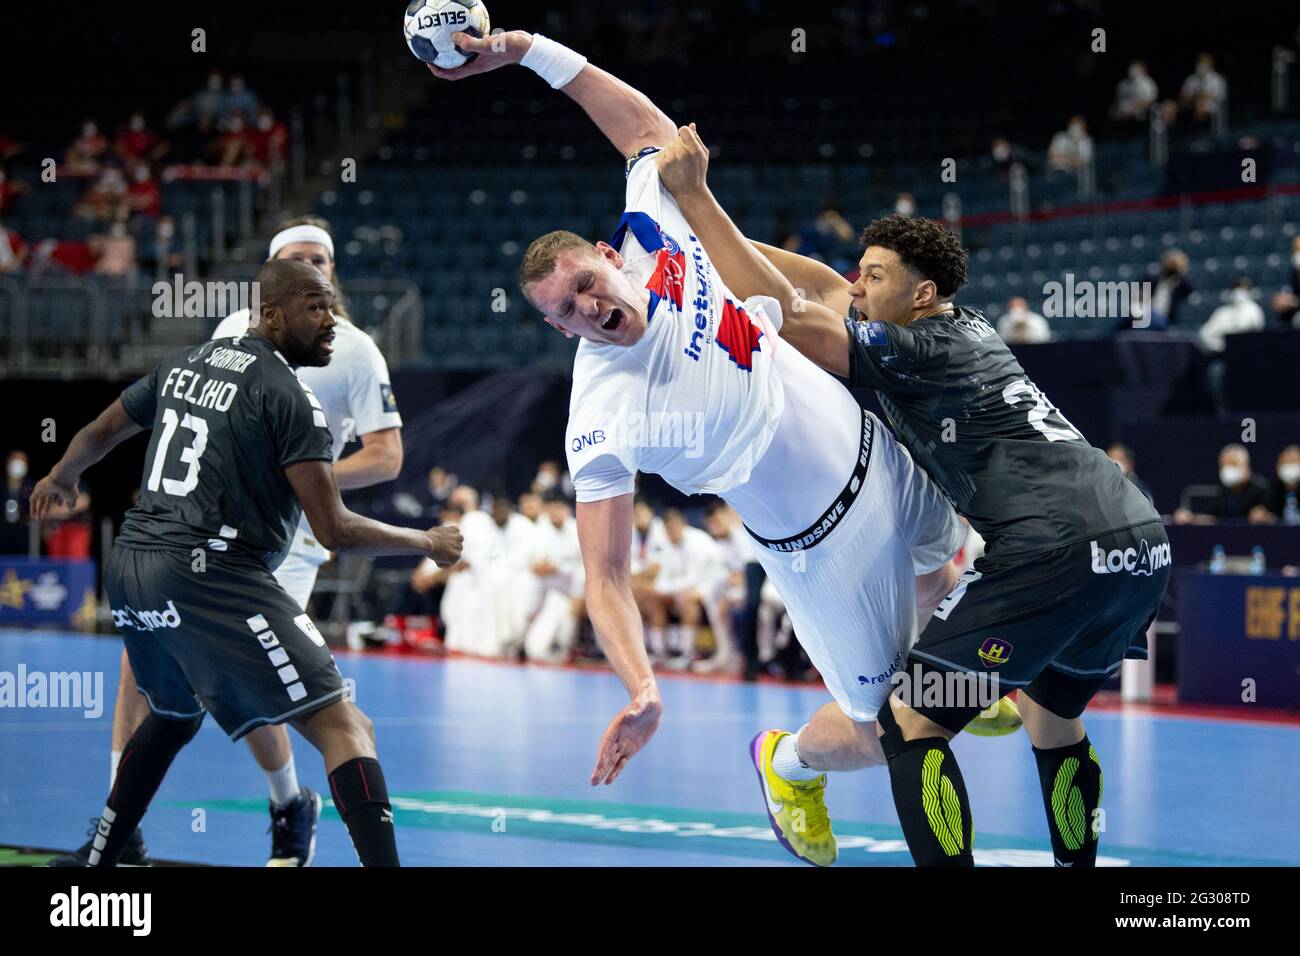 Cologne, Germany. 13th June, 2021. Handball: Champions League, Paris St.  Germain - HBC Nantes, final round, Final Four, match for 3rd place at the  Lanxess Arena. Theo Monar (r) of Nantes tries